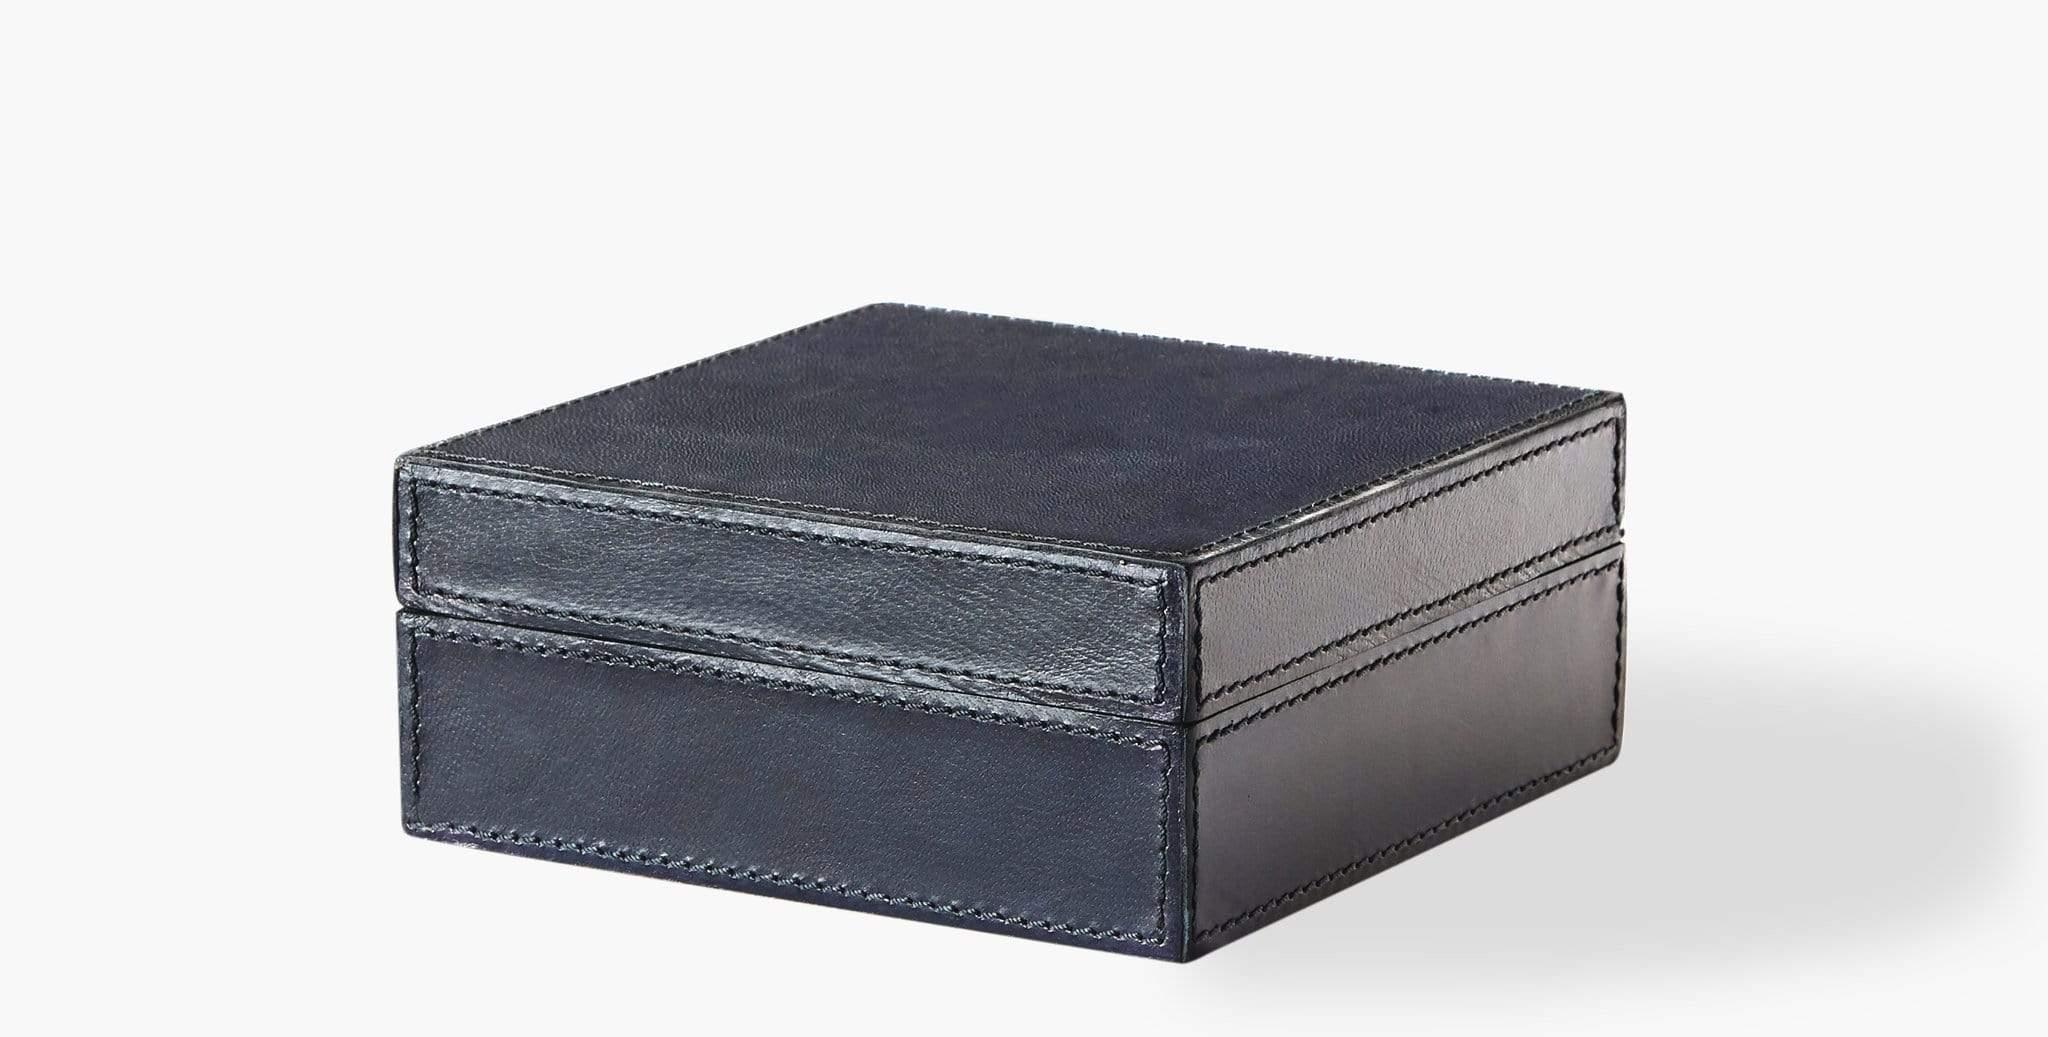 Our Bromes Leather Boxes feature suede lining and base, providing a functional accent in your home office. Our handcrafted fabrics, leathers, and finishes are inspired by the natural variations within fibers, textures, and weaves. Each selection is